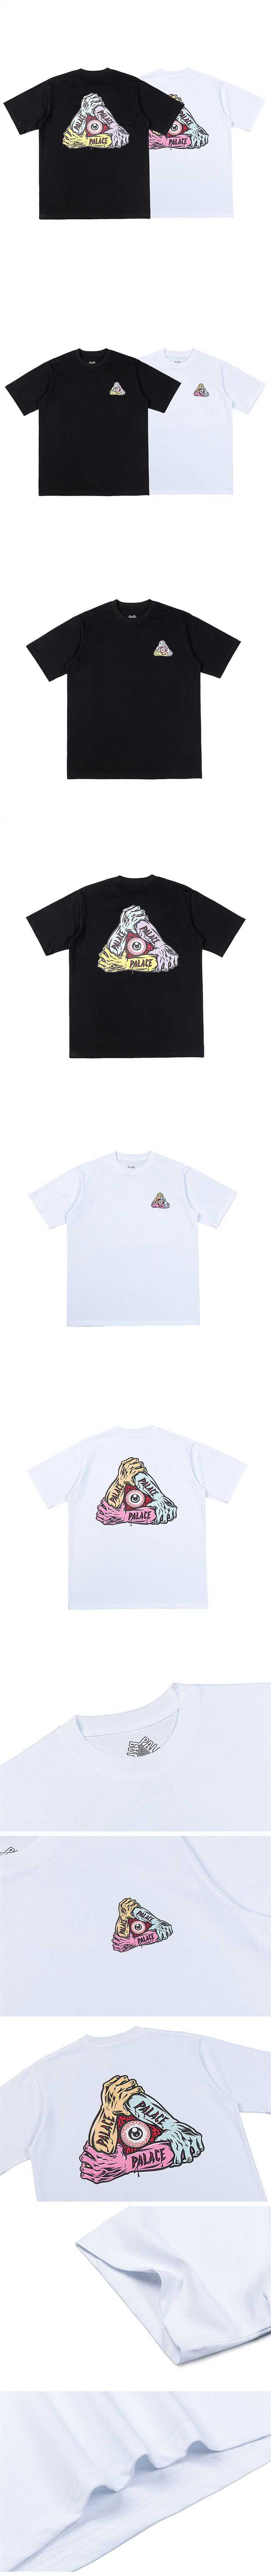 Palace Arms Tee パレス アームス Tシャツ